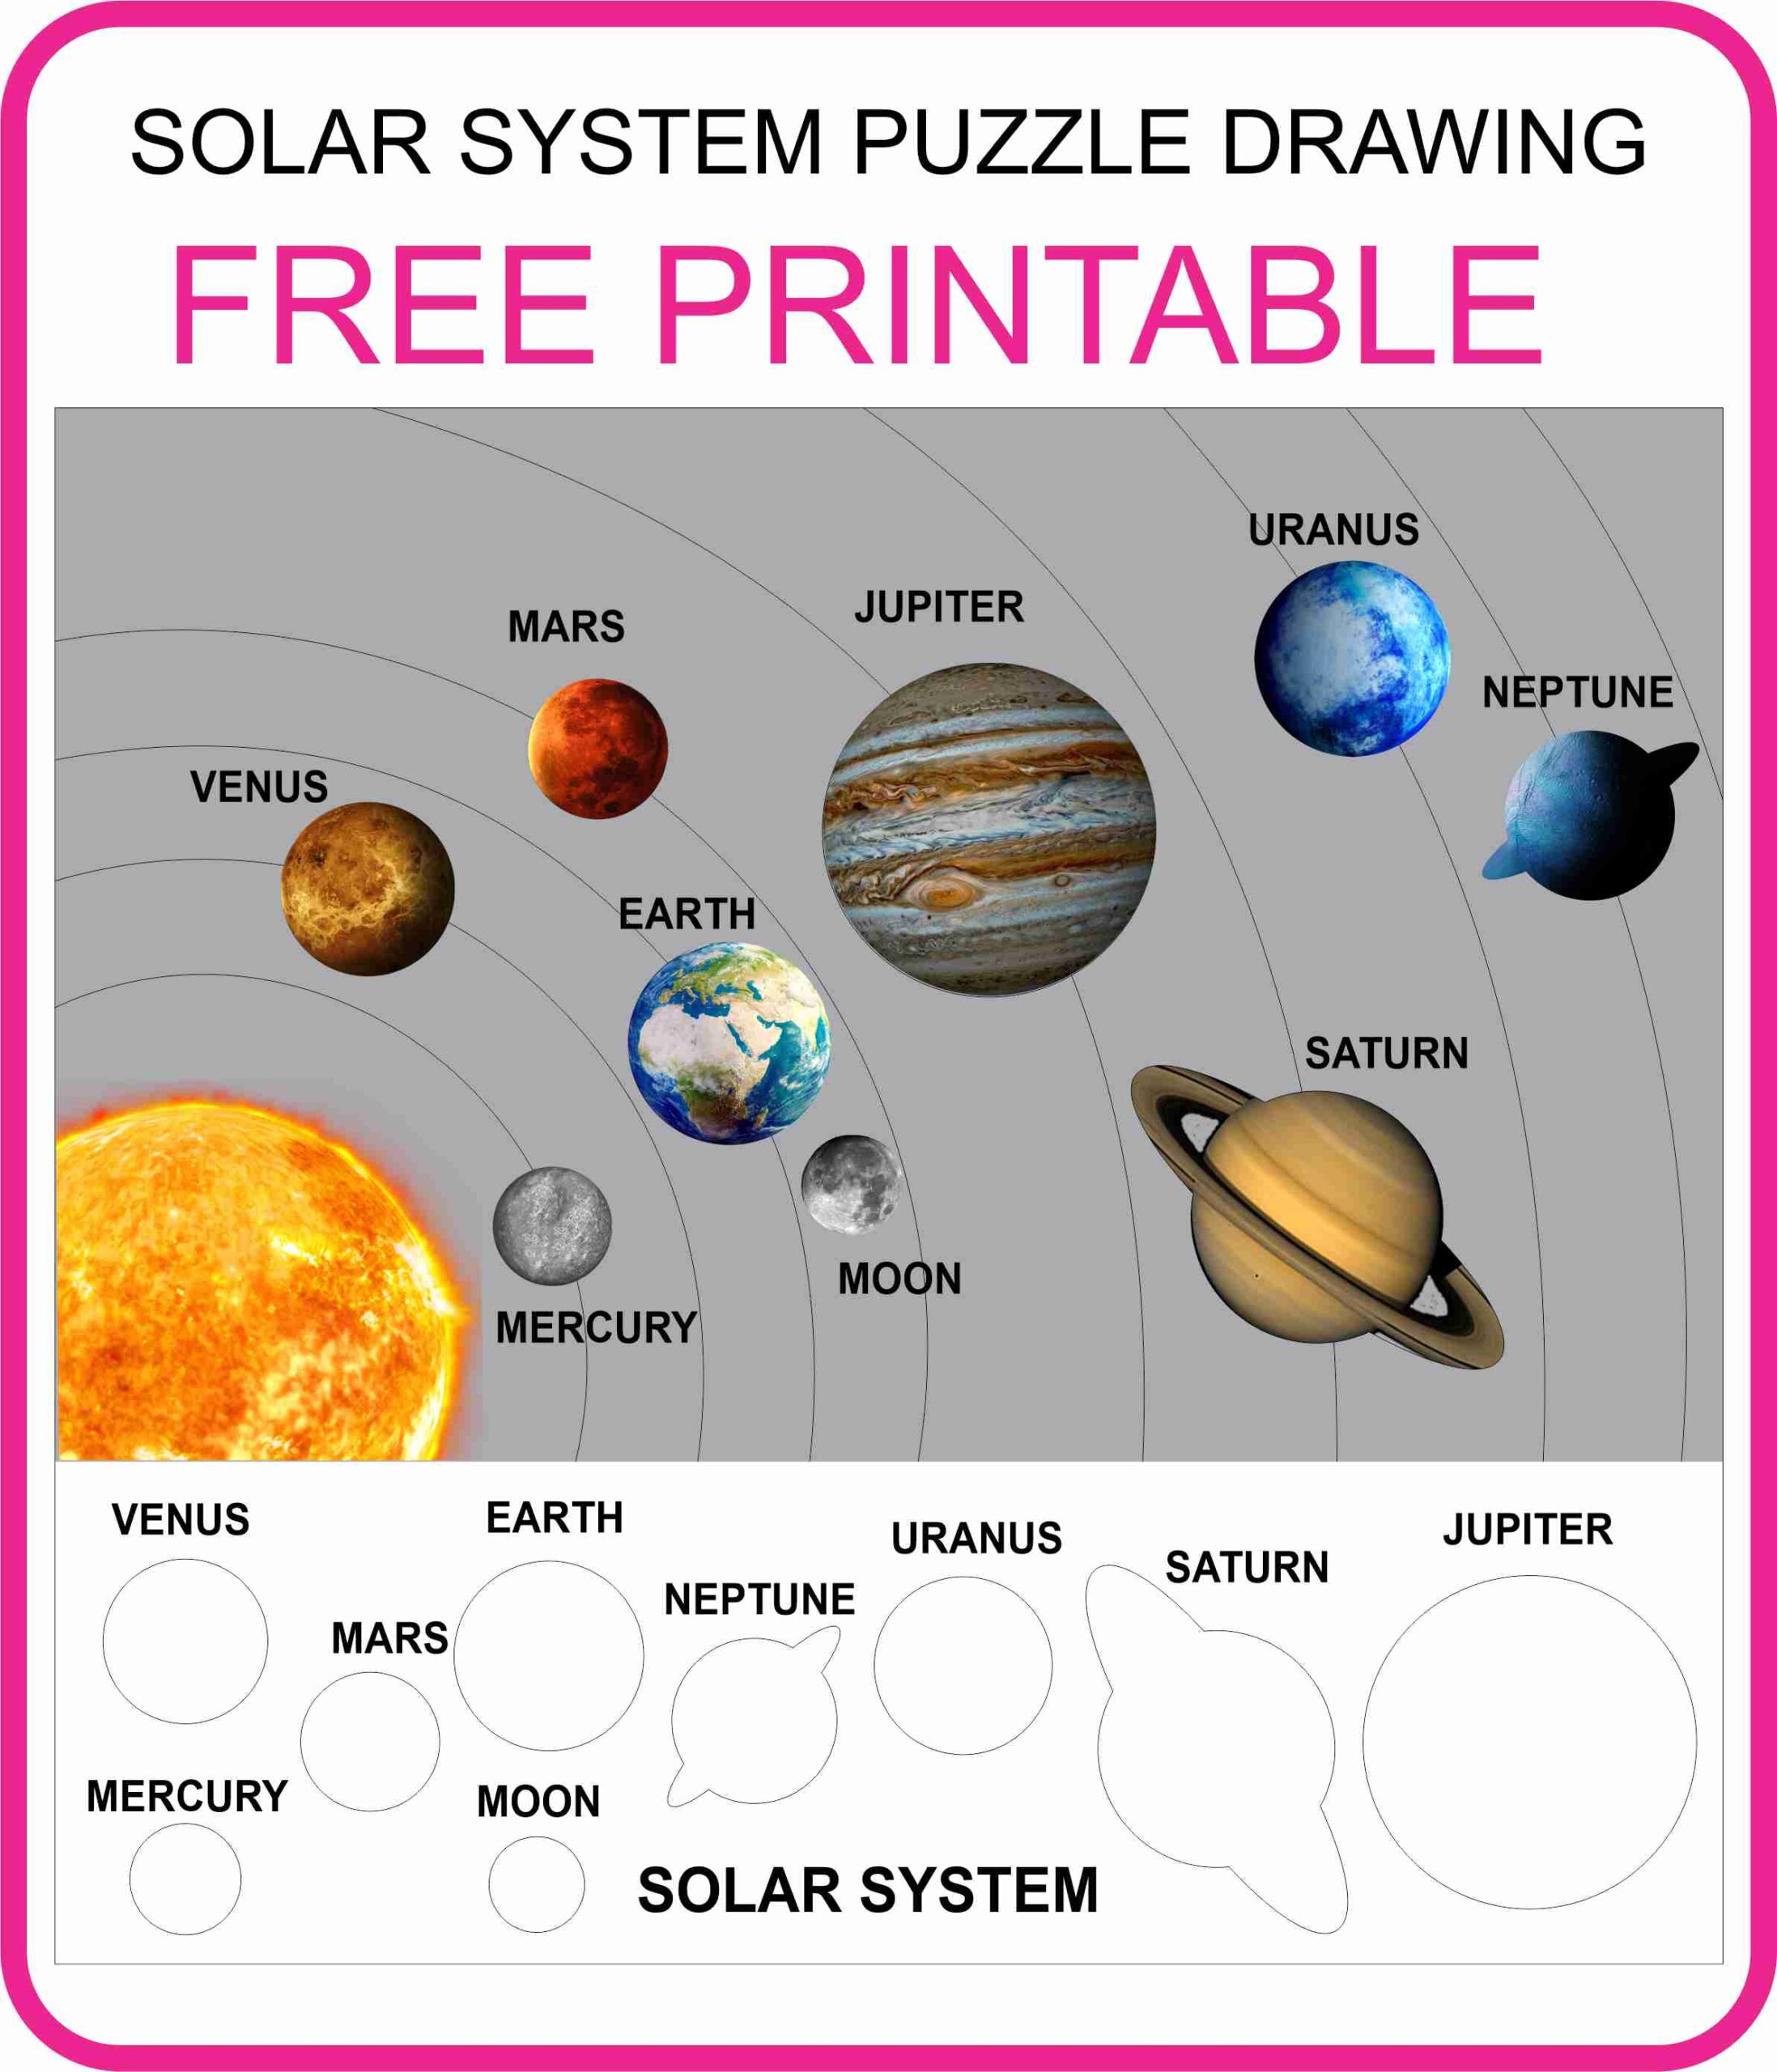 solar-system-drawing-puzzle-free-pintable-cards-montessoriseries